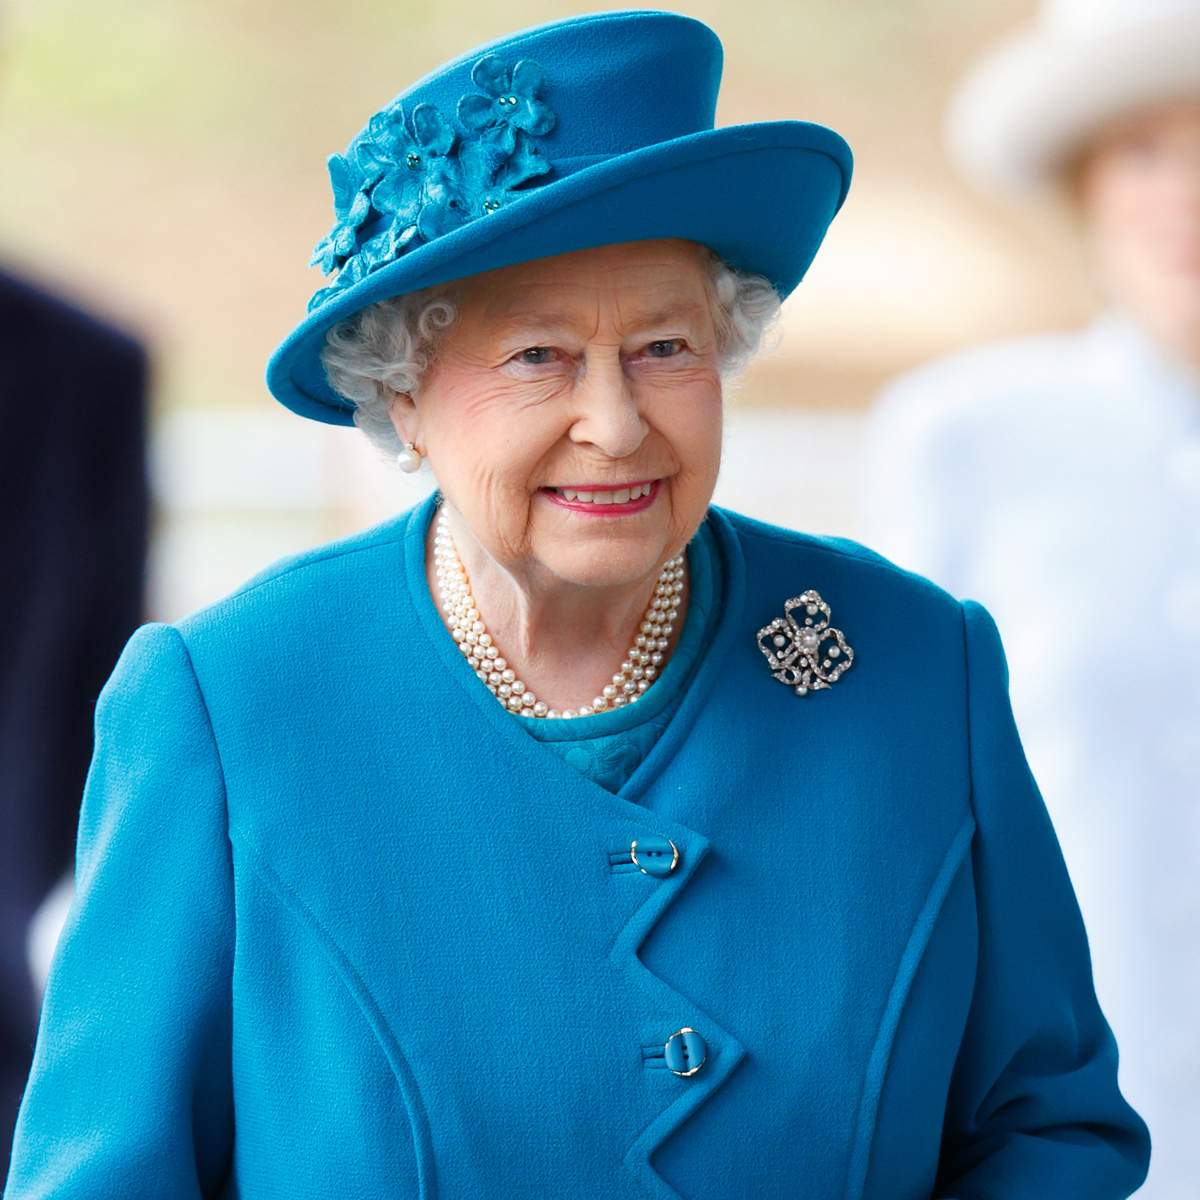 Queen Elizabeth’s Accession Day: How the Royal Family Is Marking the Occasion 4 Months After Her Death – E! Online